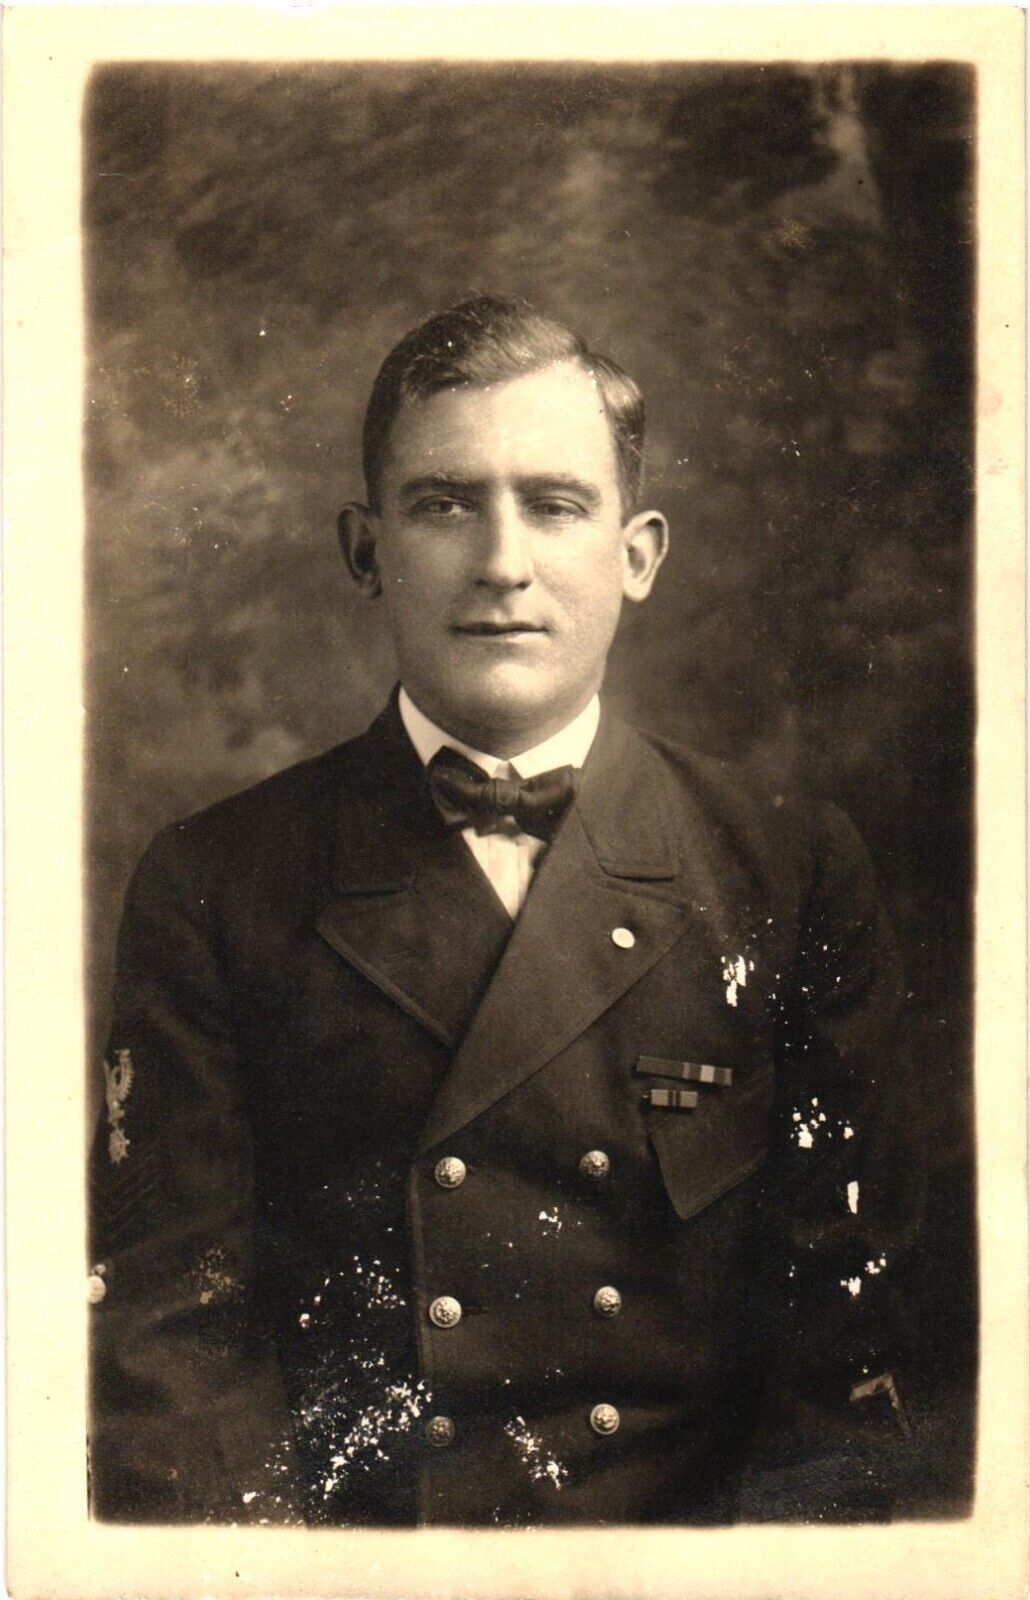 A Portrait of A Man In Black Suit and Bowties Photograph Postcard